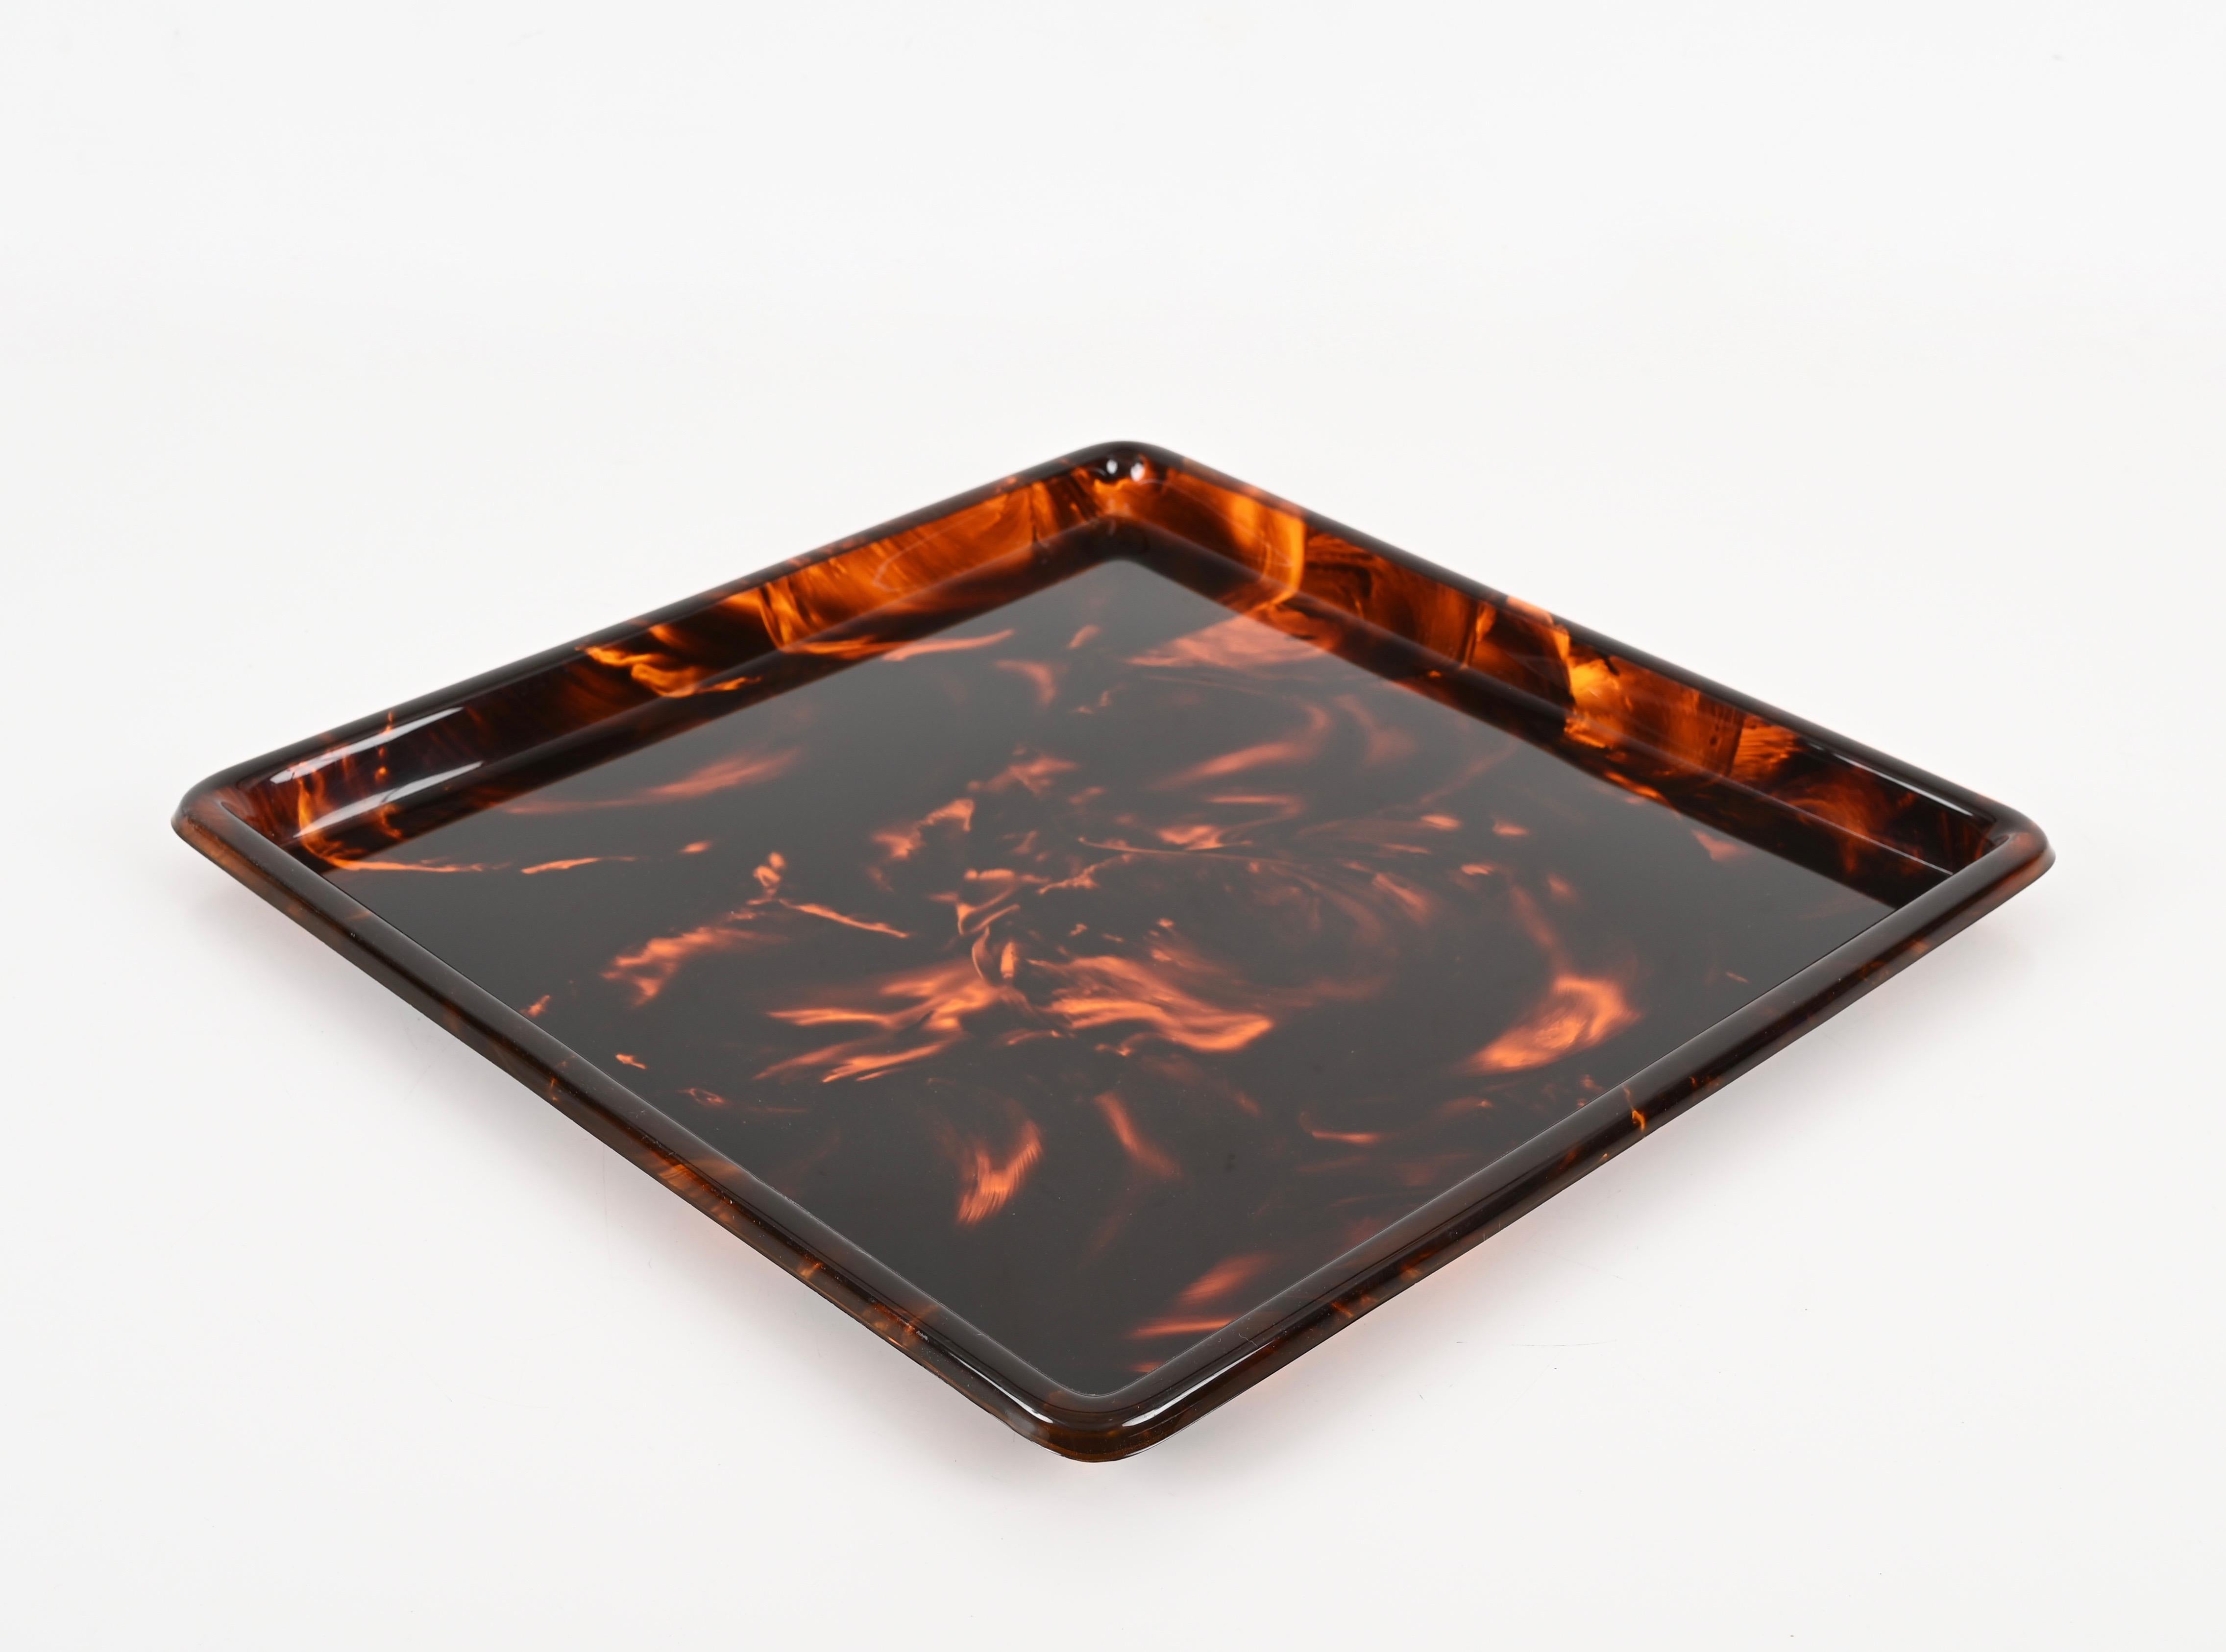 Italian Christian Dior Square Tortoiseshell Effect Lucite Serving Tray, Italy 1970s For Sale